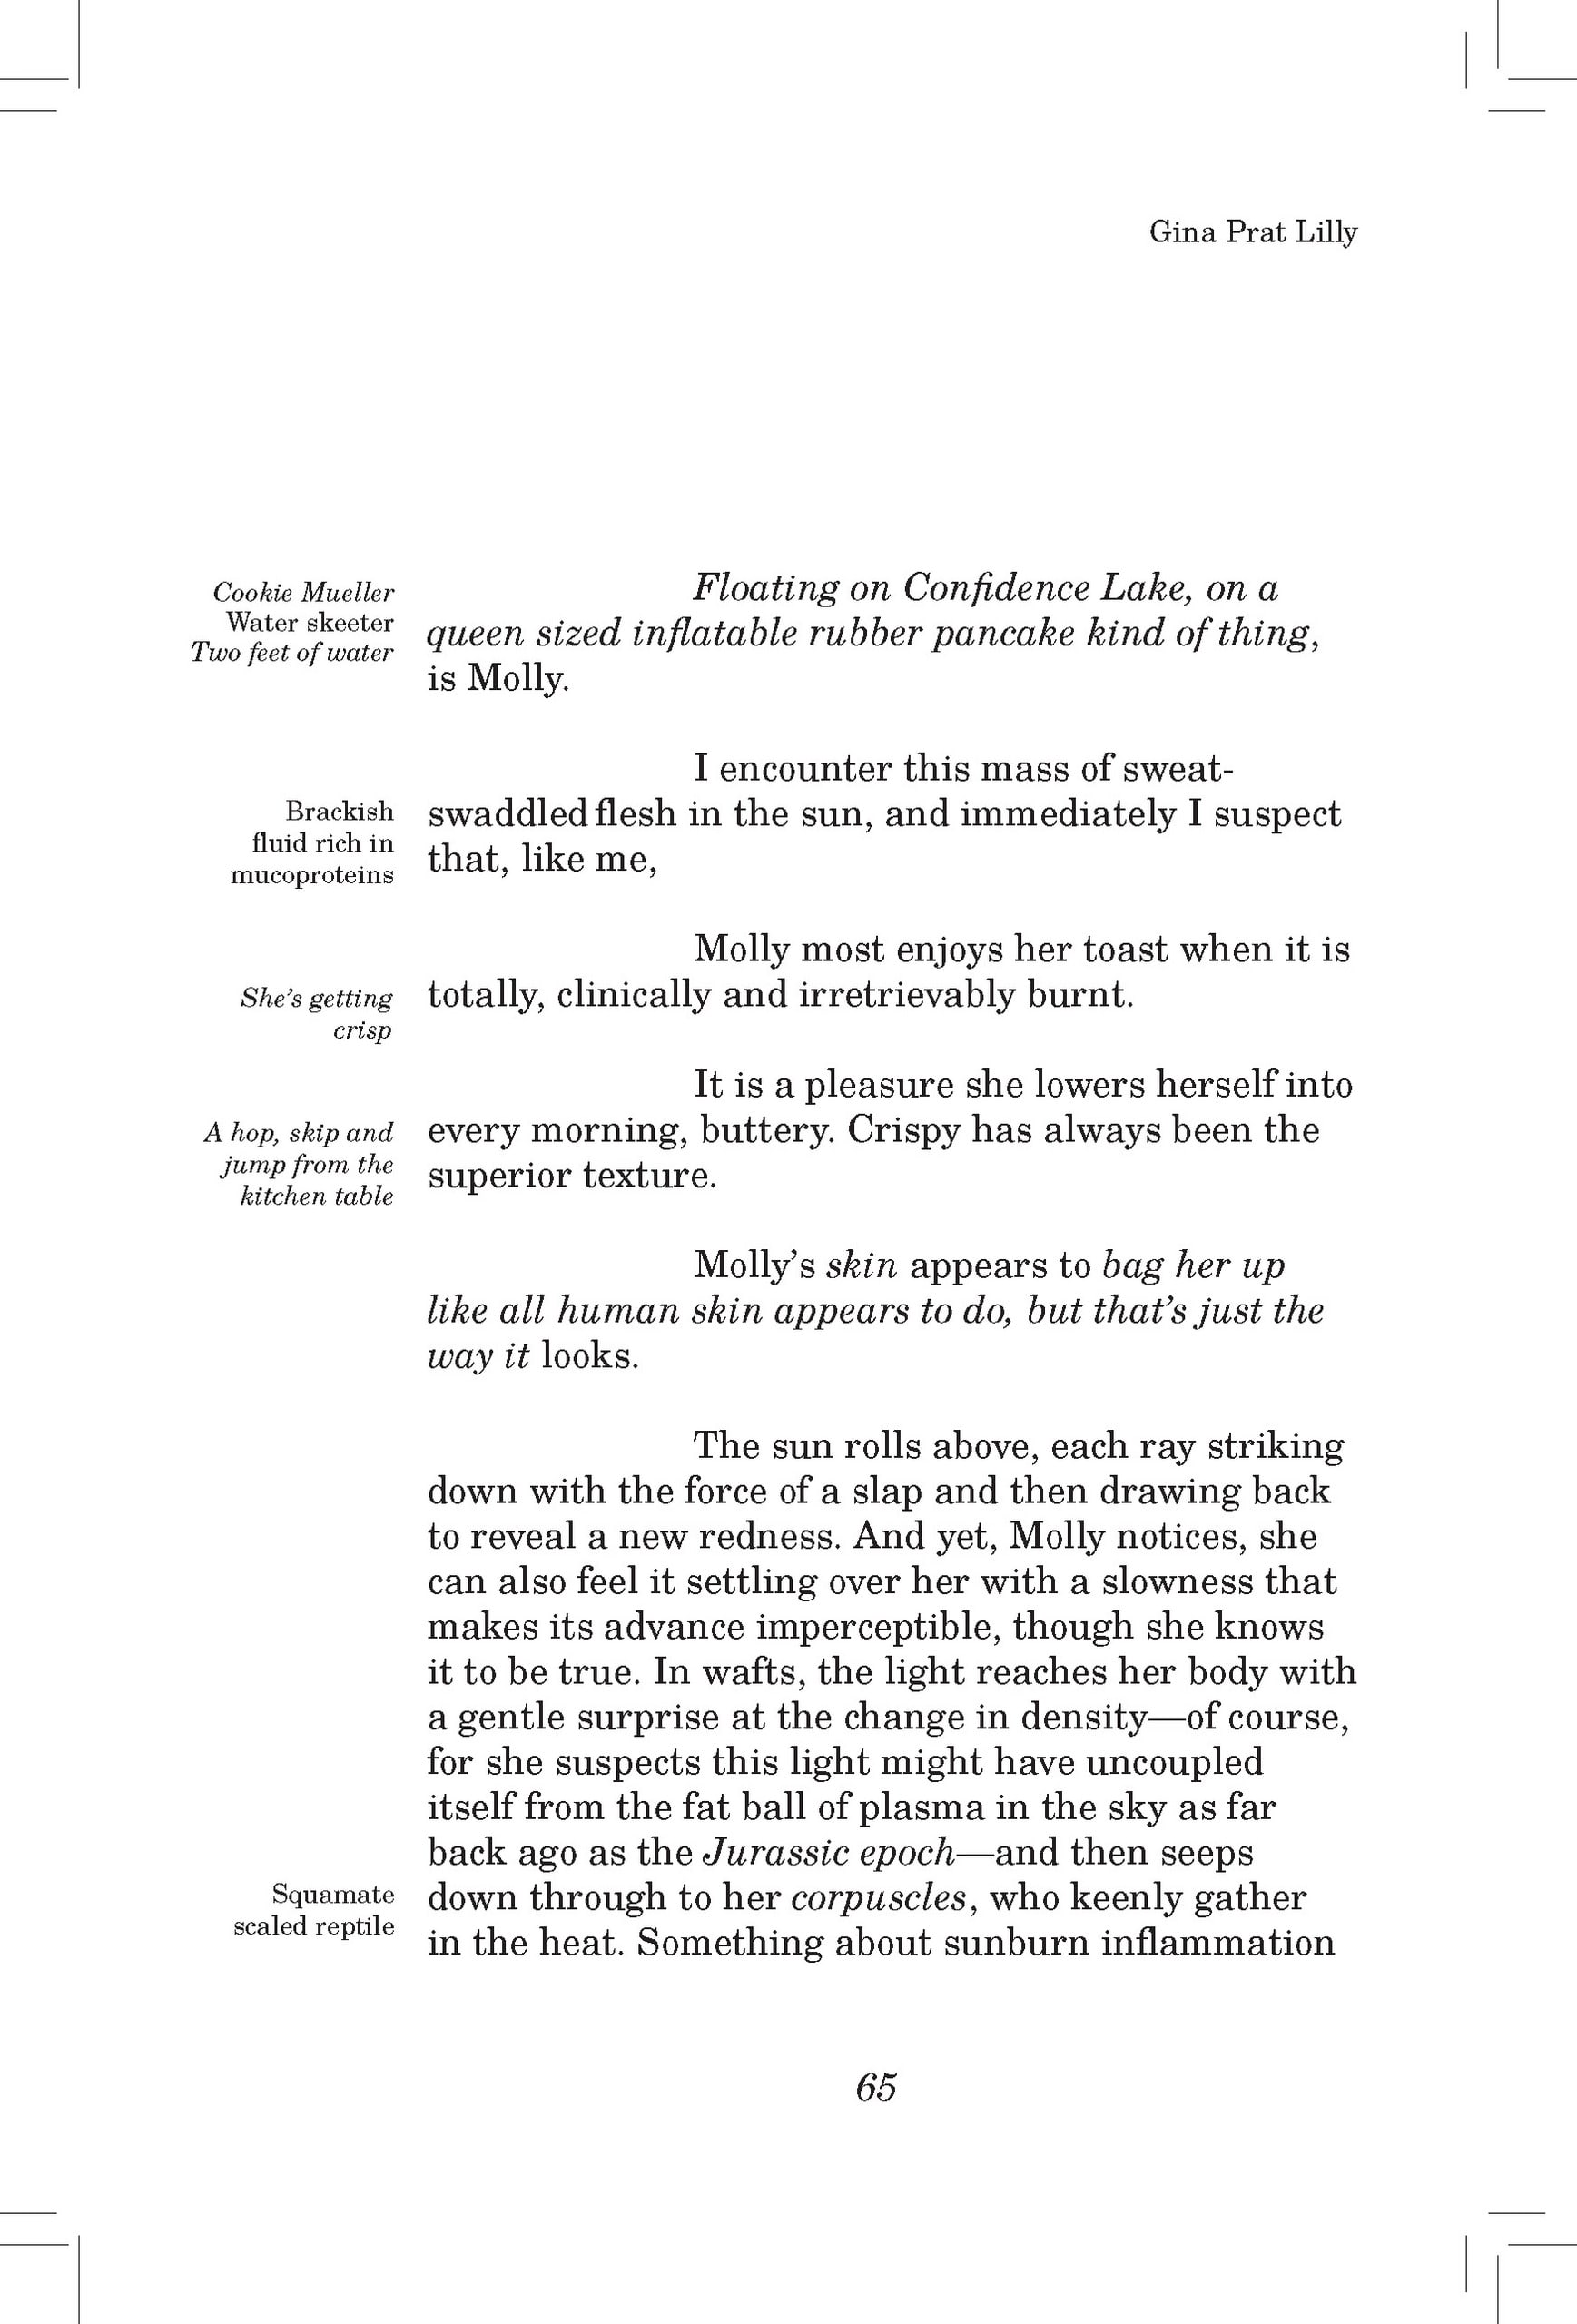 First page of essay excerpt. Black serif writing on white background. Quotations in margins.